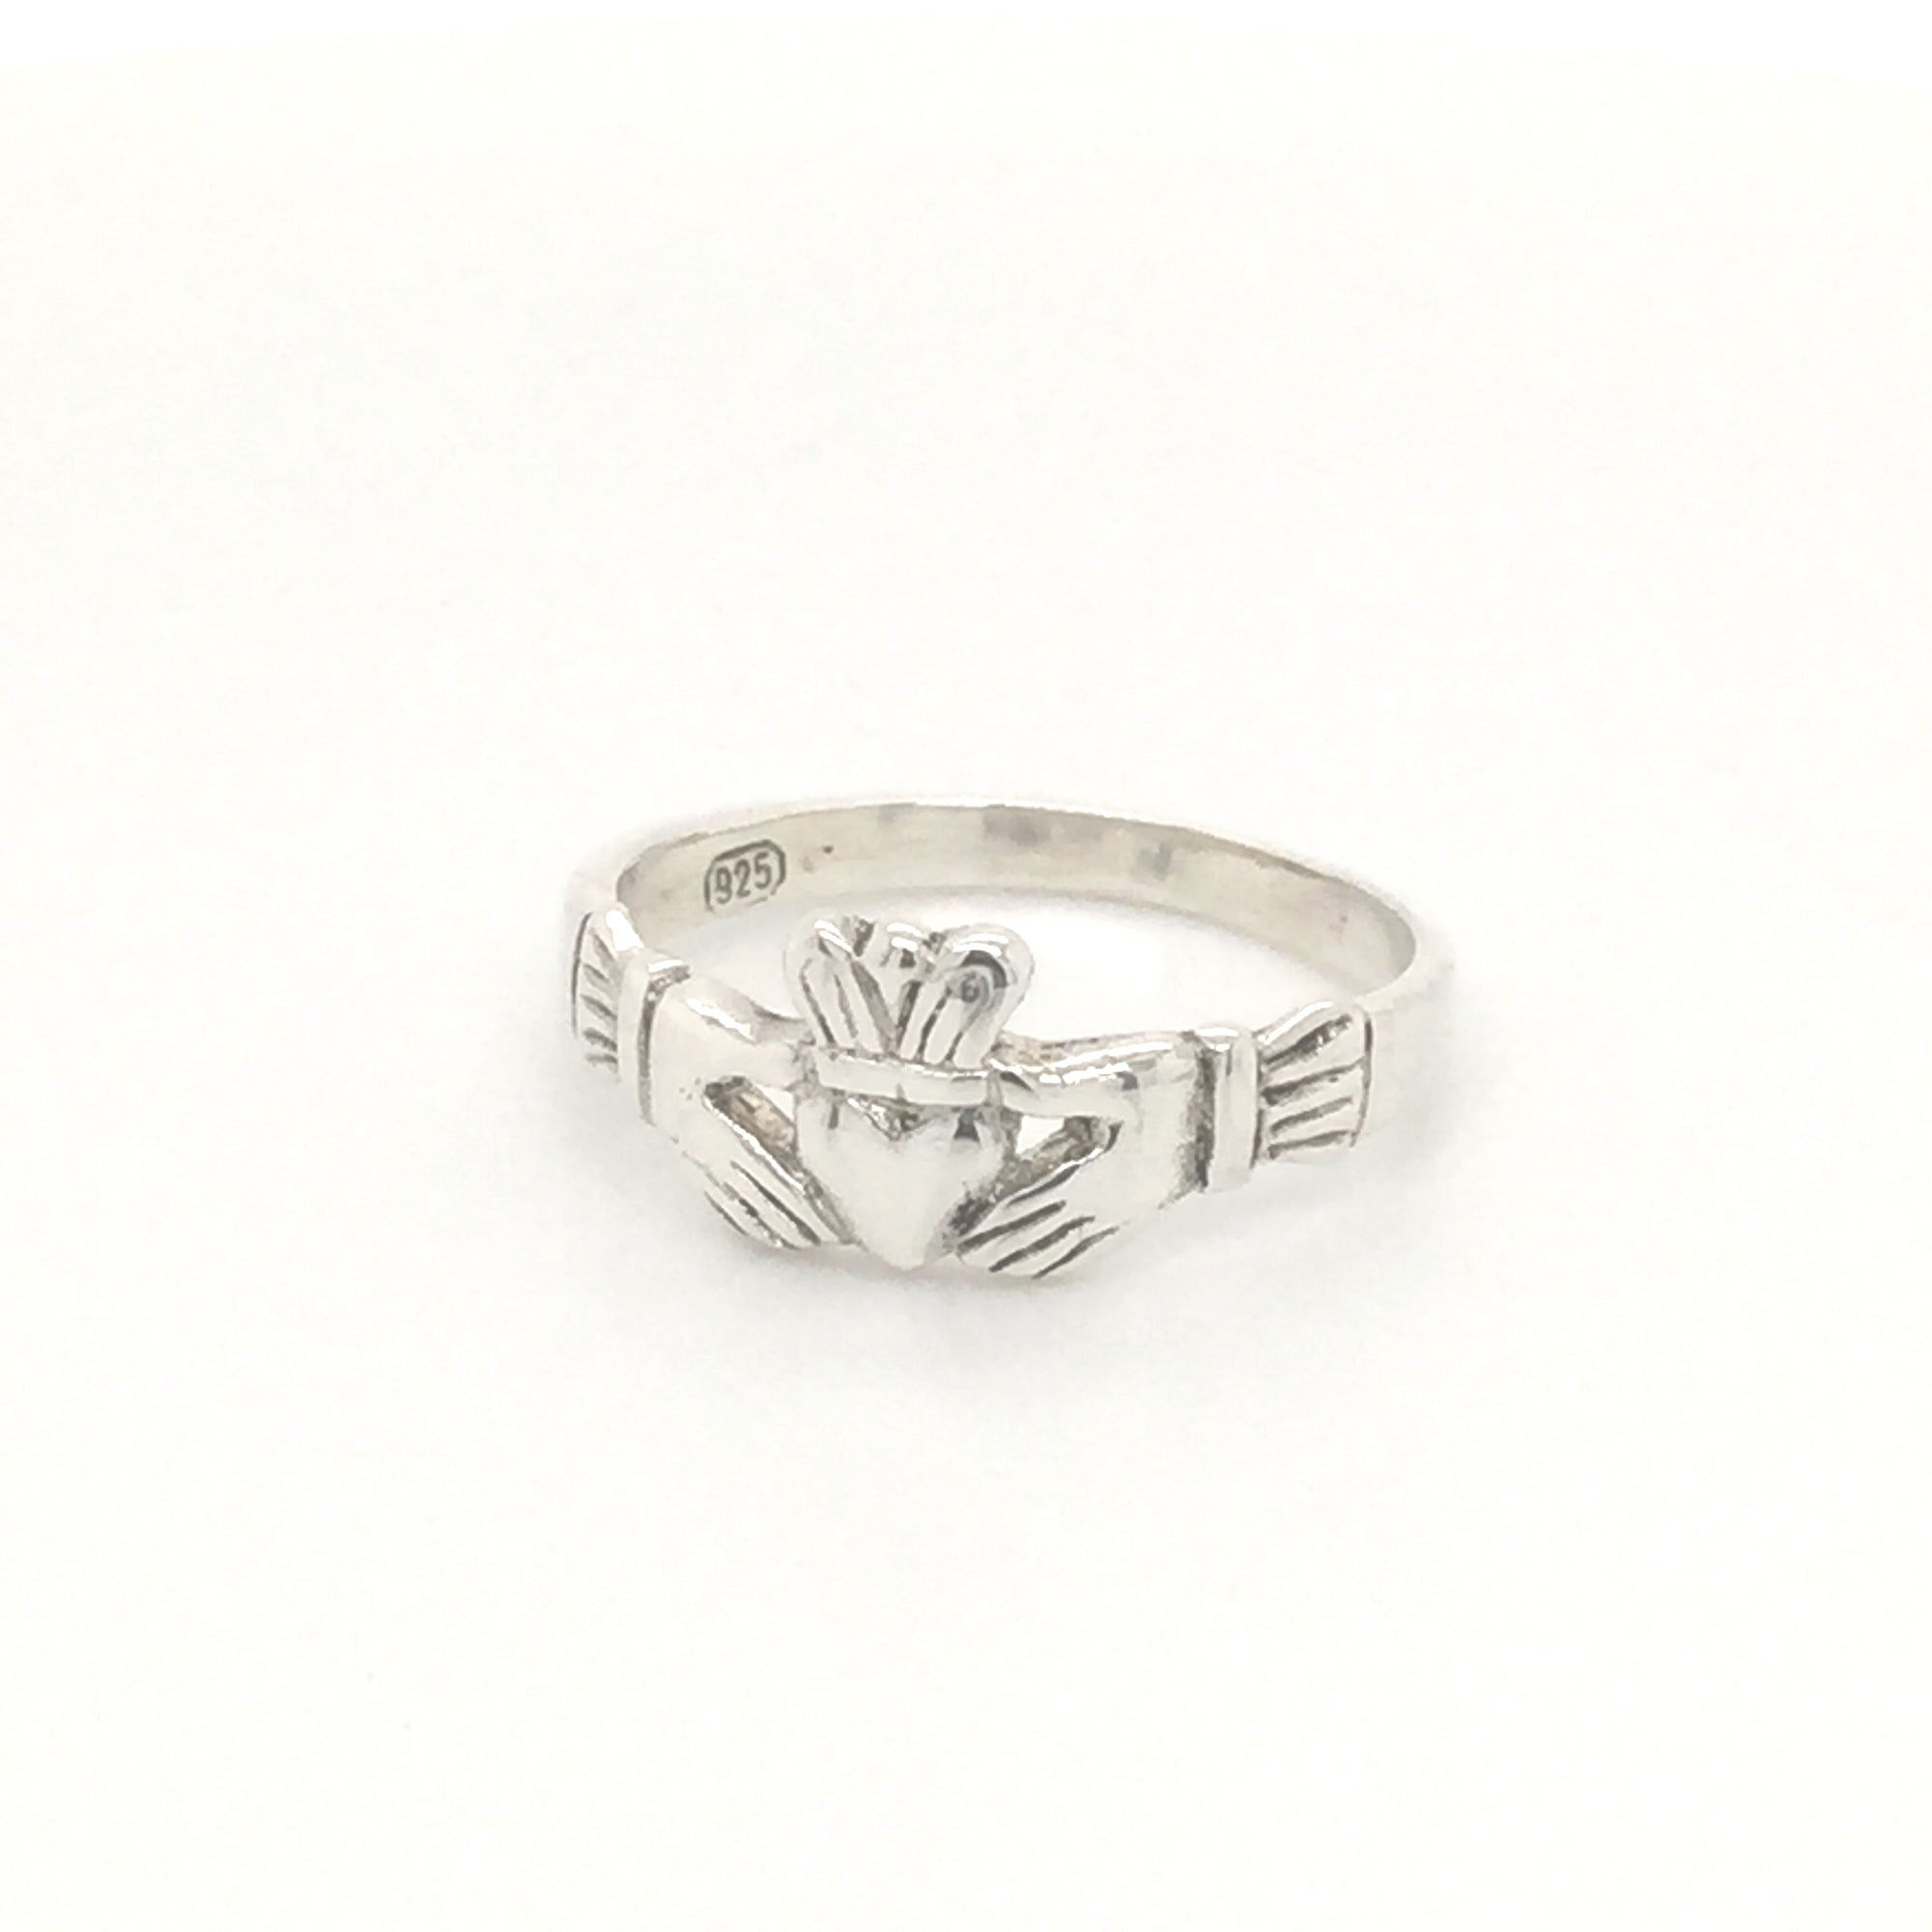 Sterling silver Irish claddagh ring. - Red Carpet Jewellers